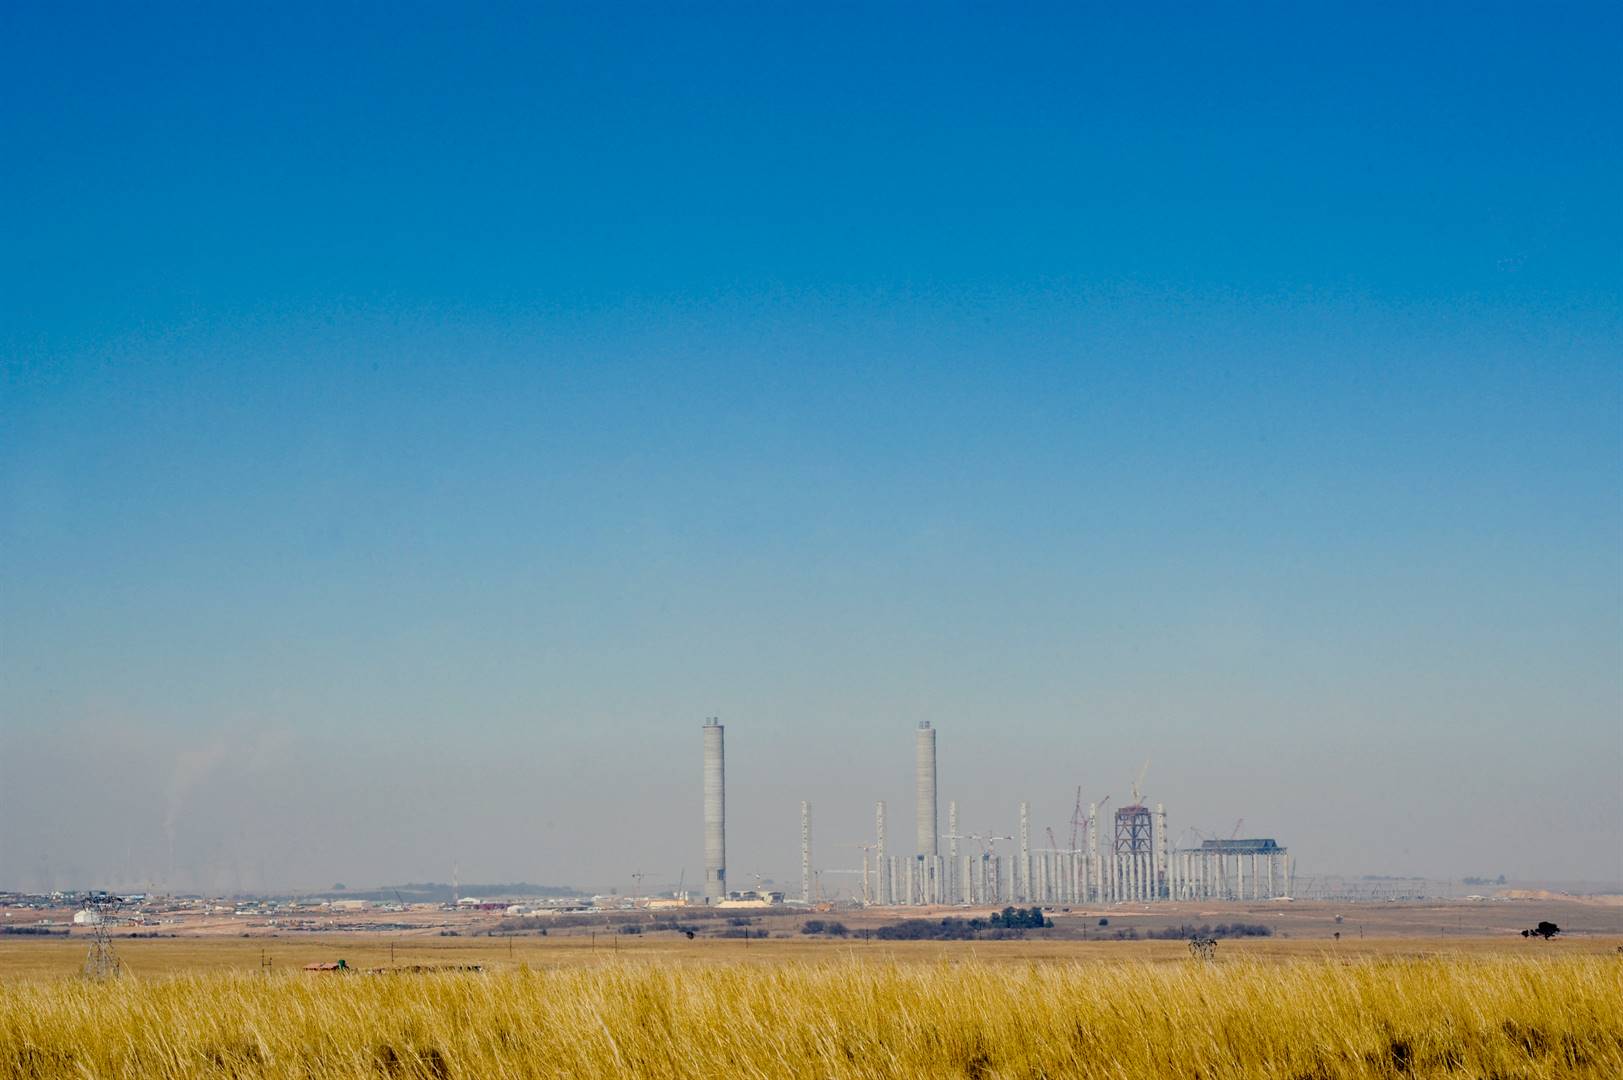 Kusile is a coal-fired power station close to the existing Kendal power station in the Delmas municipal area of the Mpumalanga province. Picture: Herman Verwey/City Press